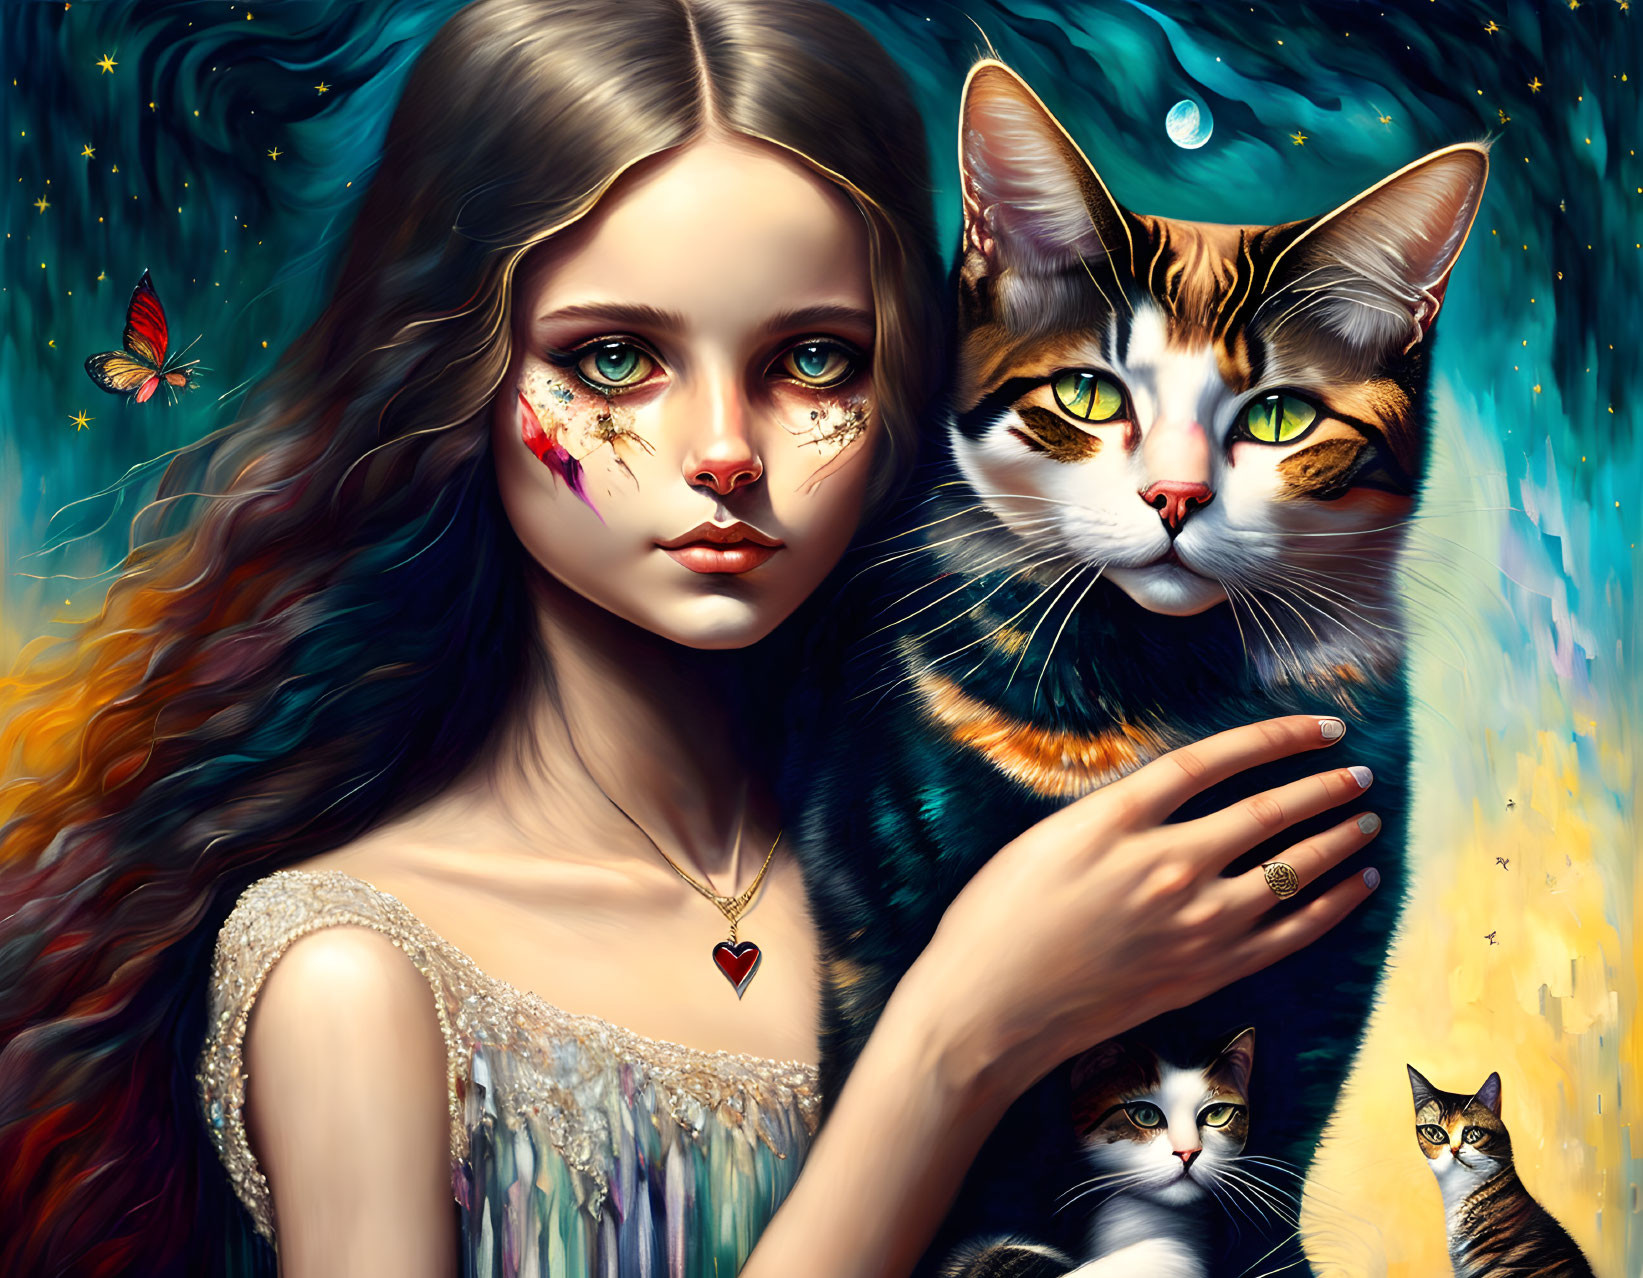 Digital artwork: Girl with striking eyes holding multicolored cat, surrounded by three cats and a butterfly